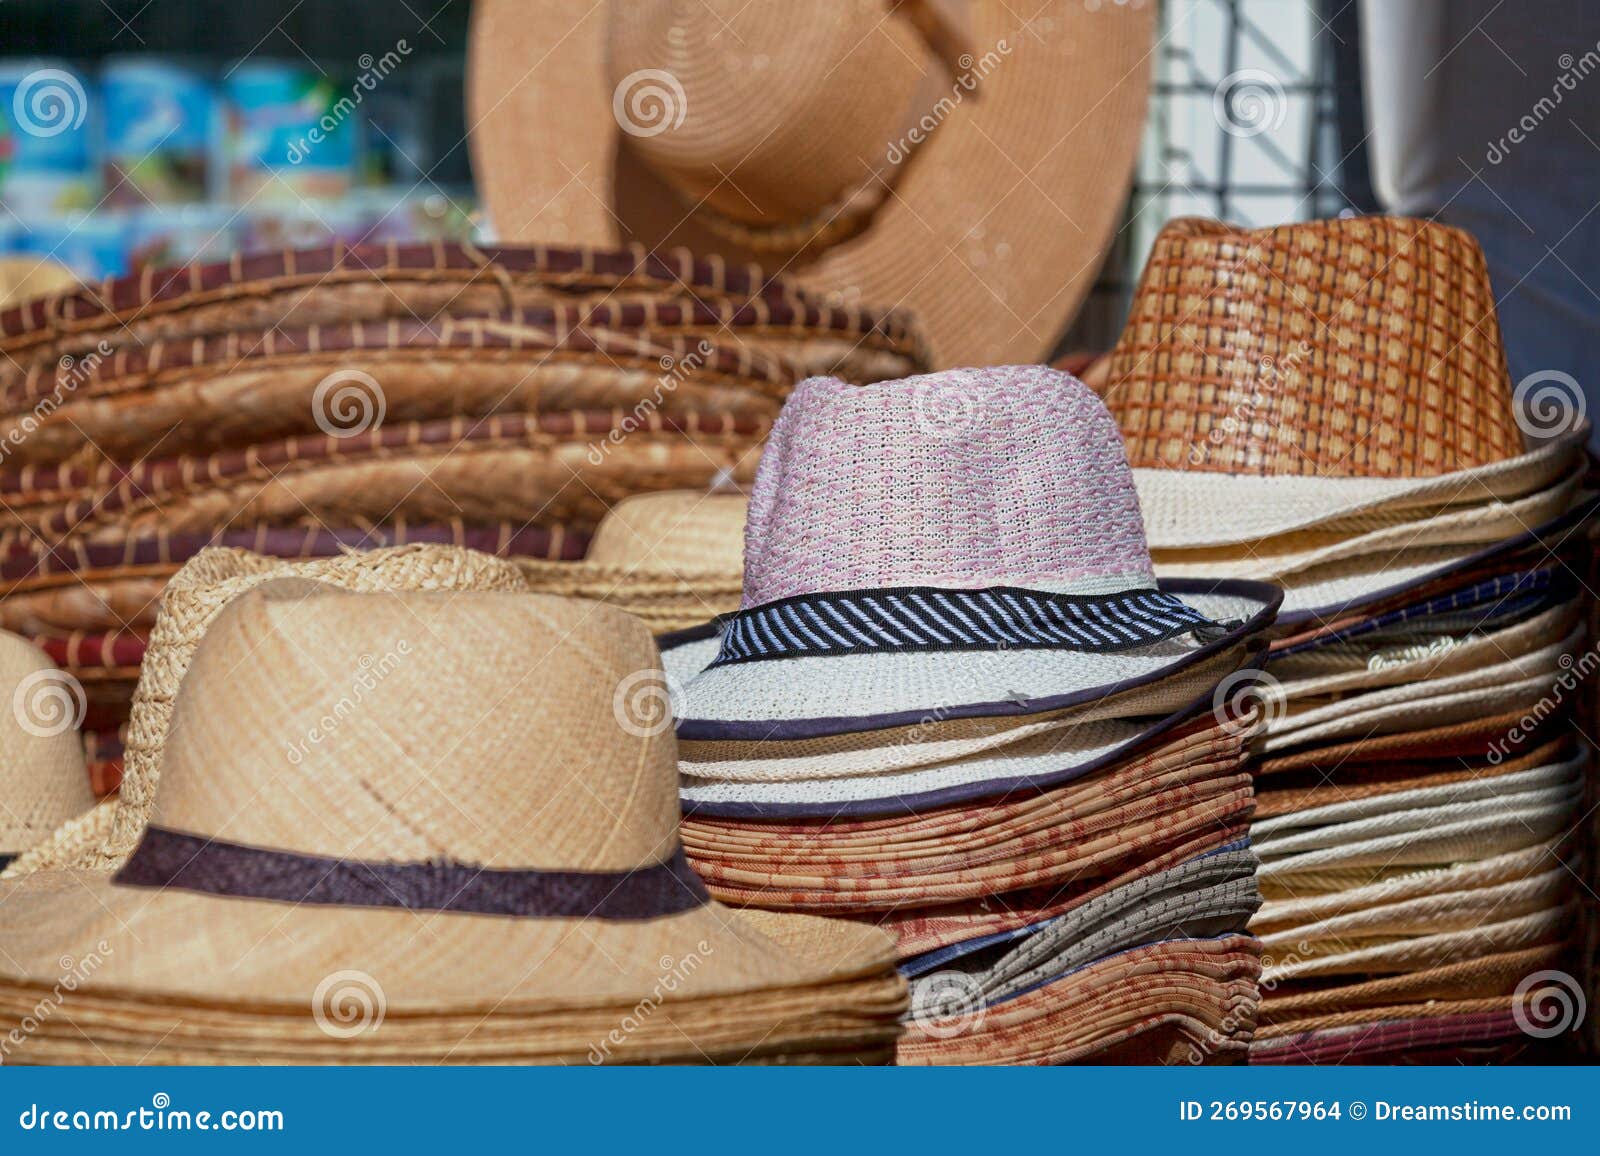 straw hats for sale on a market stall